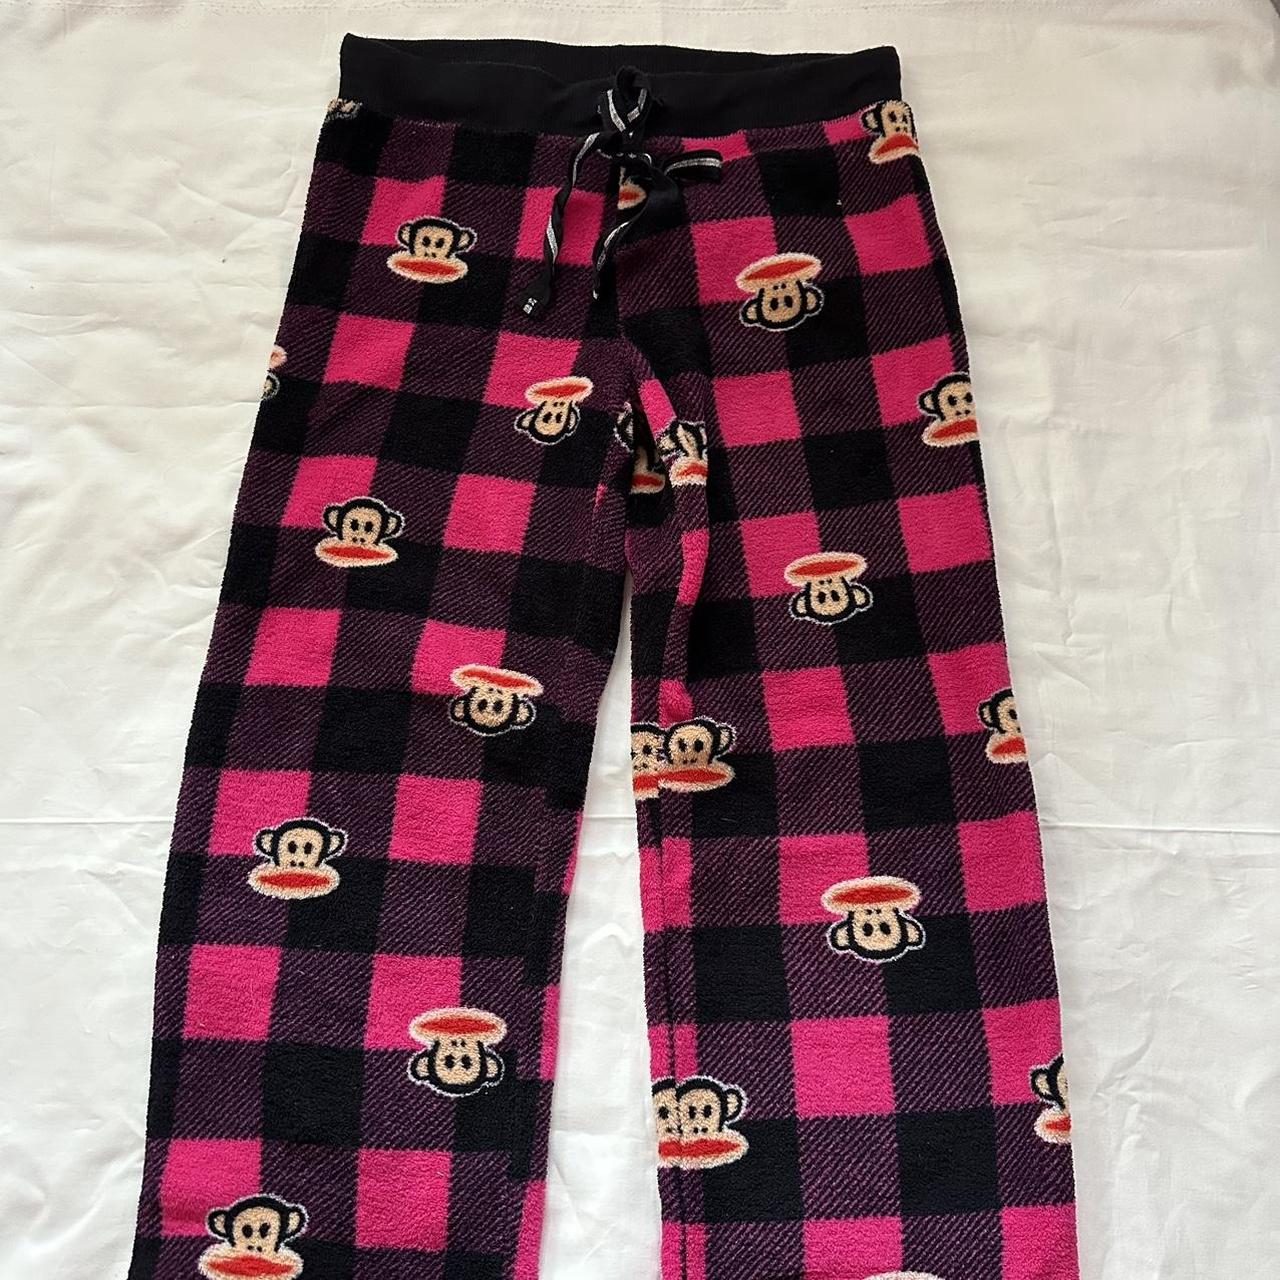 paul frank pj pants size small excellent used condition - Depop